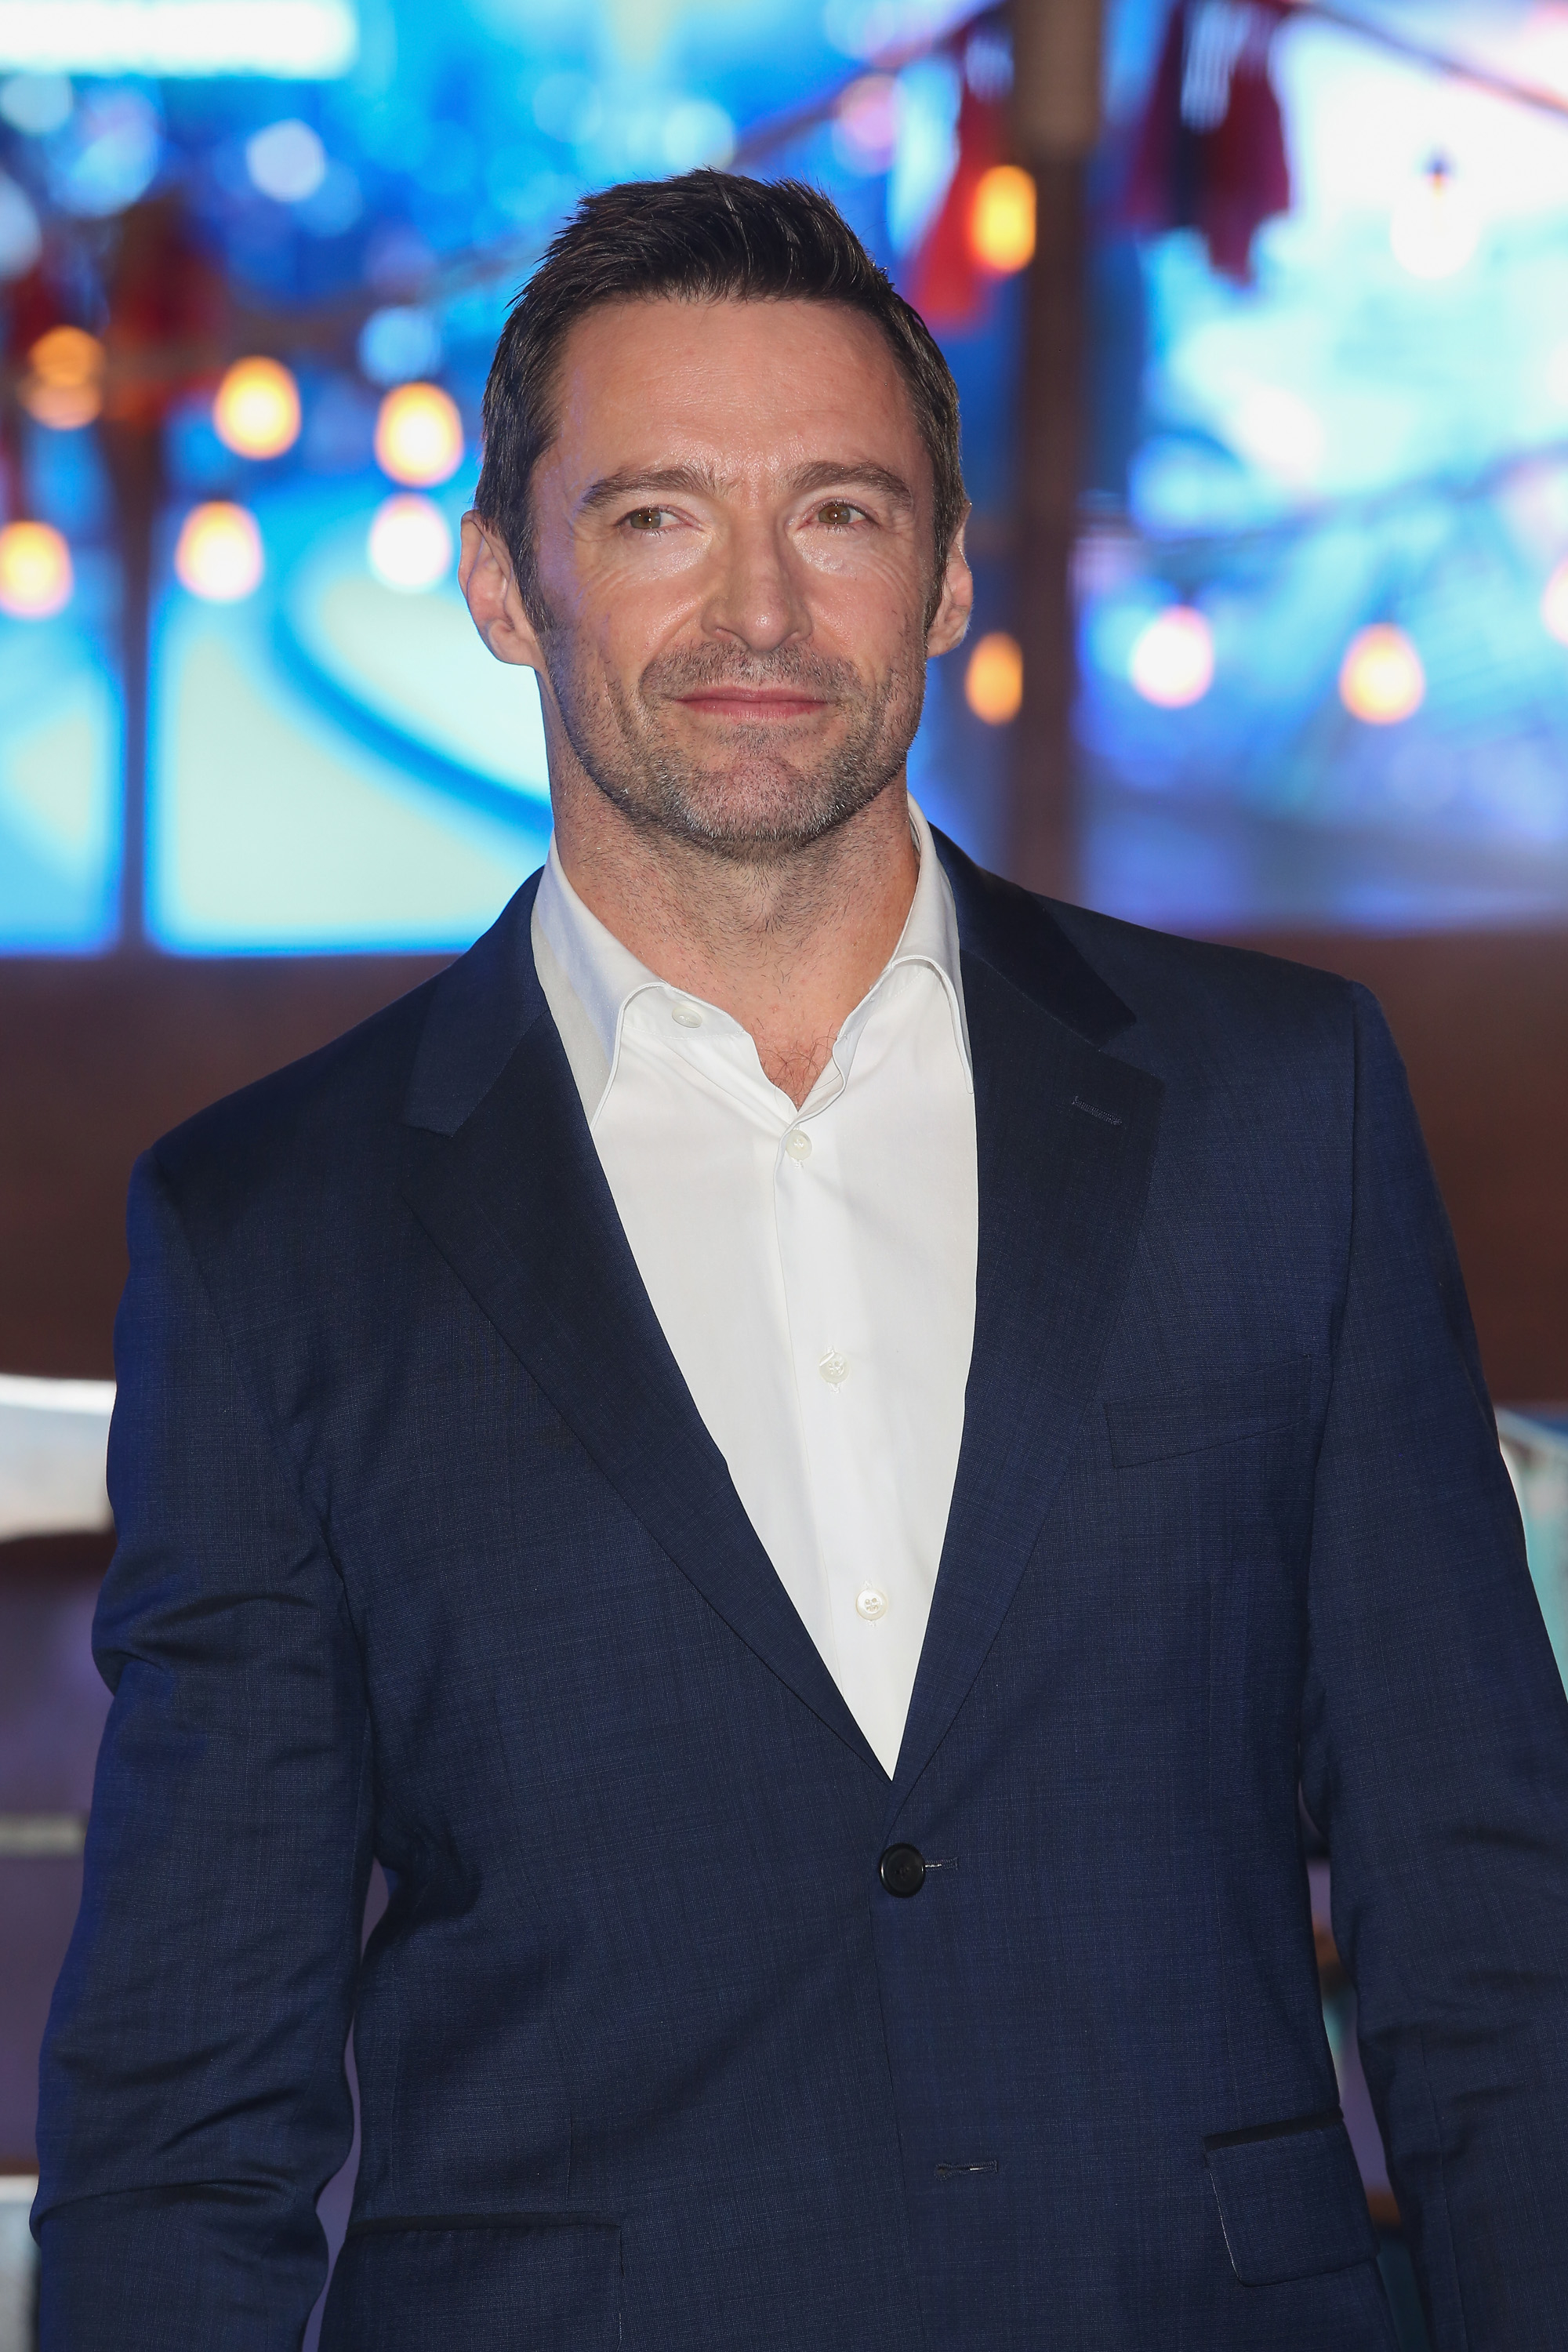 Hugh Jackman wearing a smart navy suit and smiling at a public event